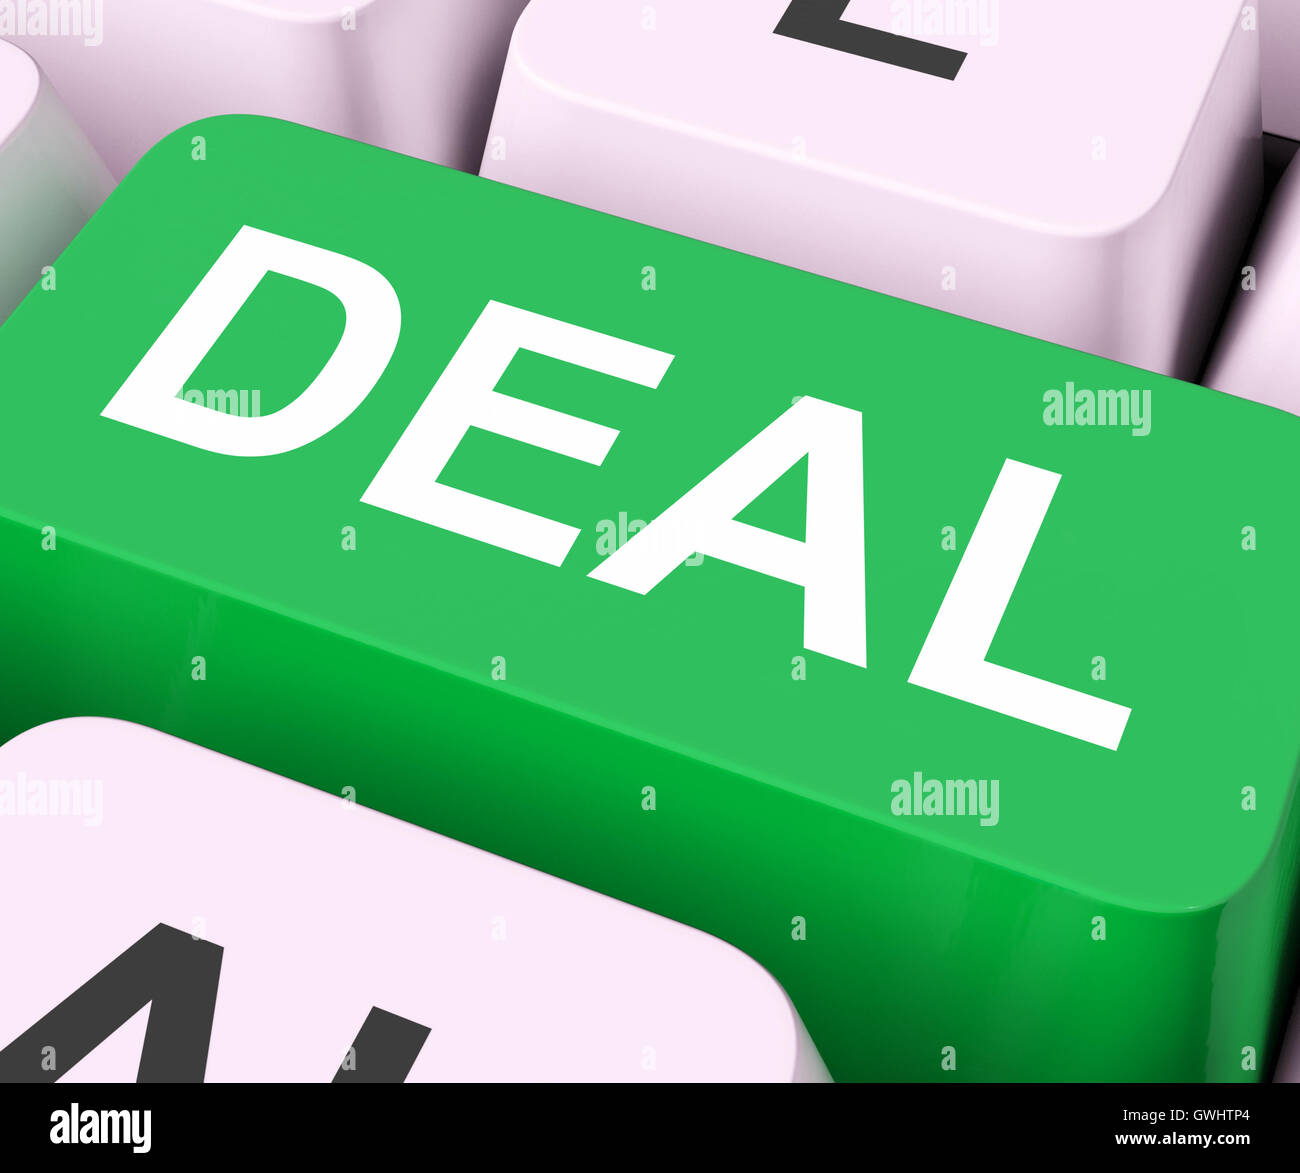 Deal Key Shows Contract Or Dealing Stock Photo